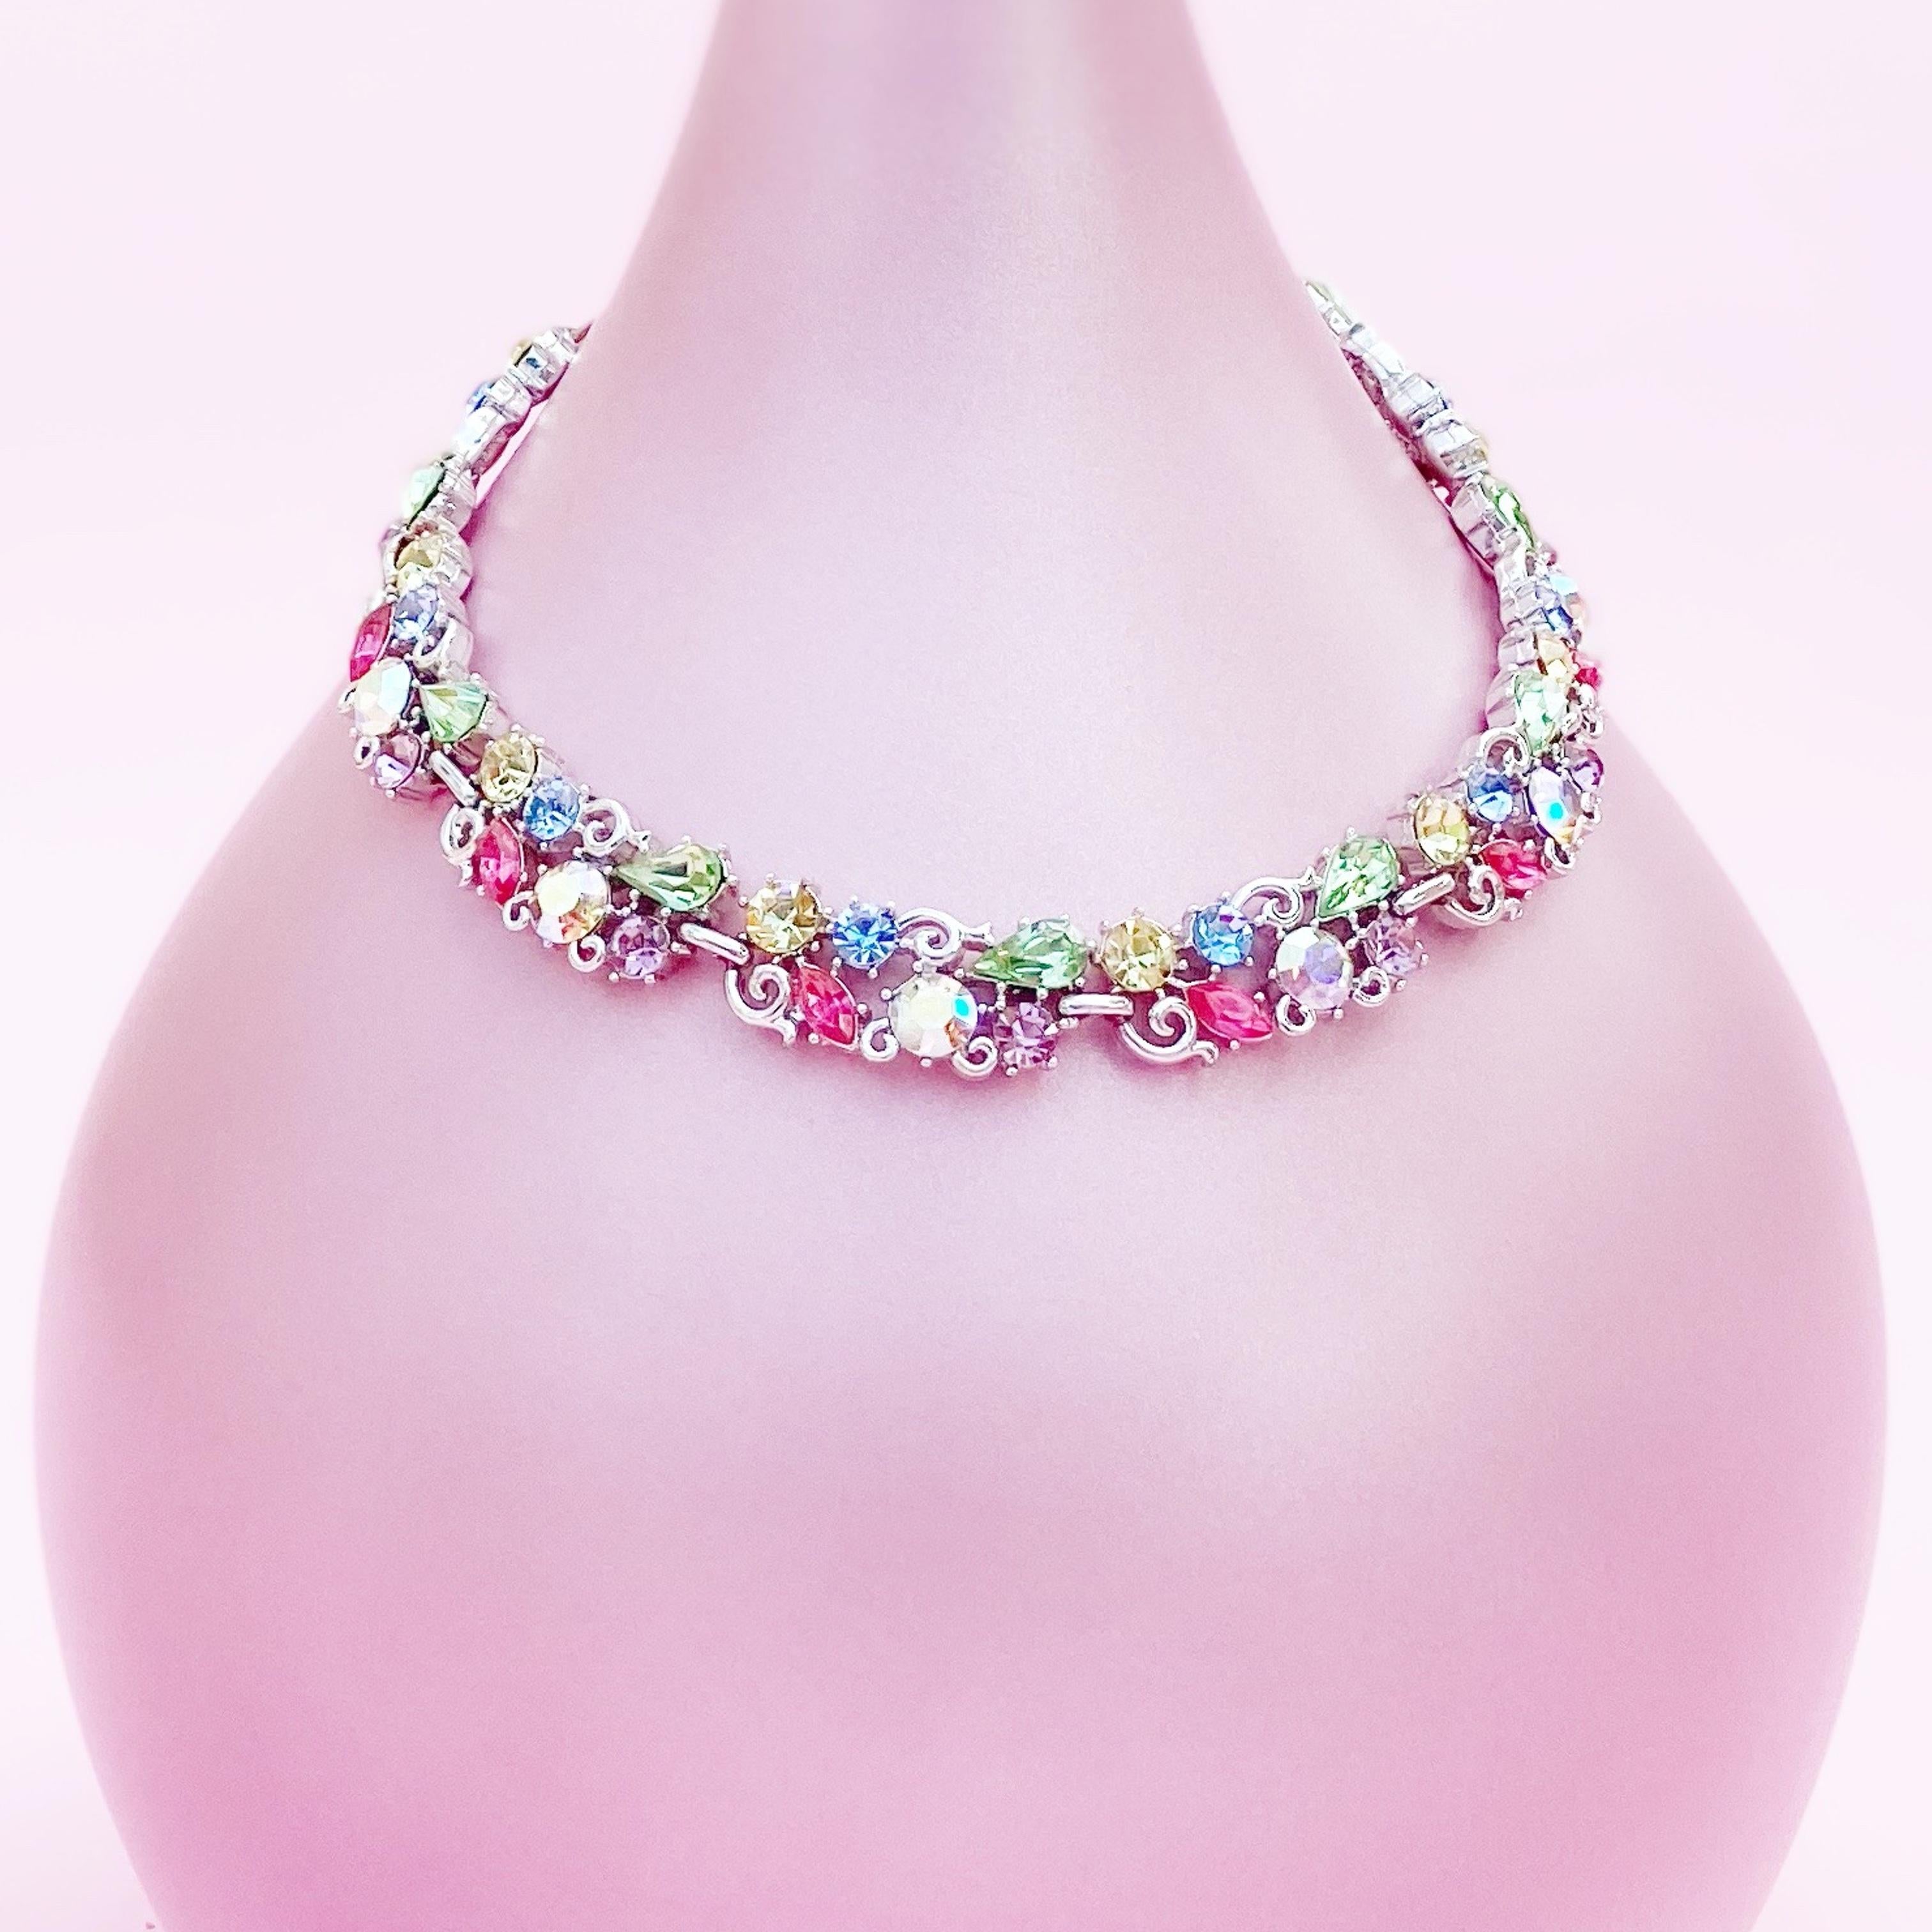 1960s Pastel Crystal Rhinestone Fruit Salad Cocktail Choker Necklace By Lisner 3